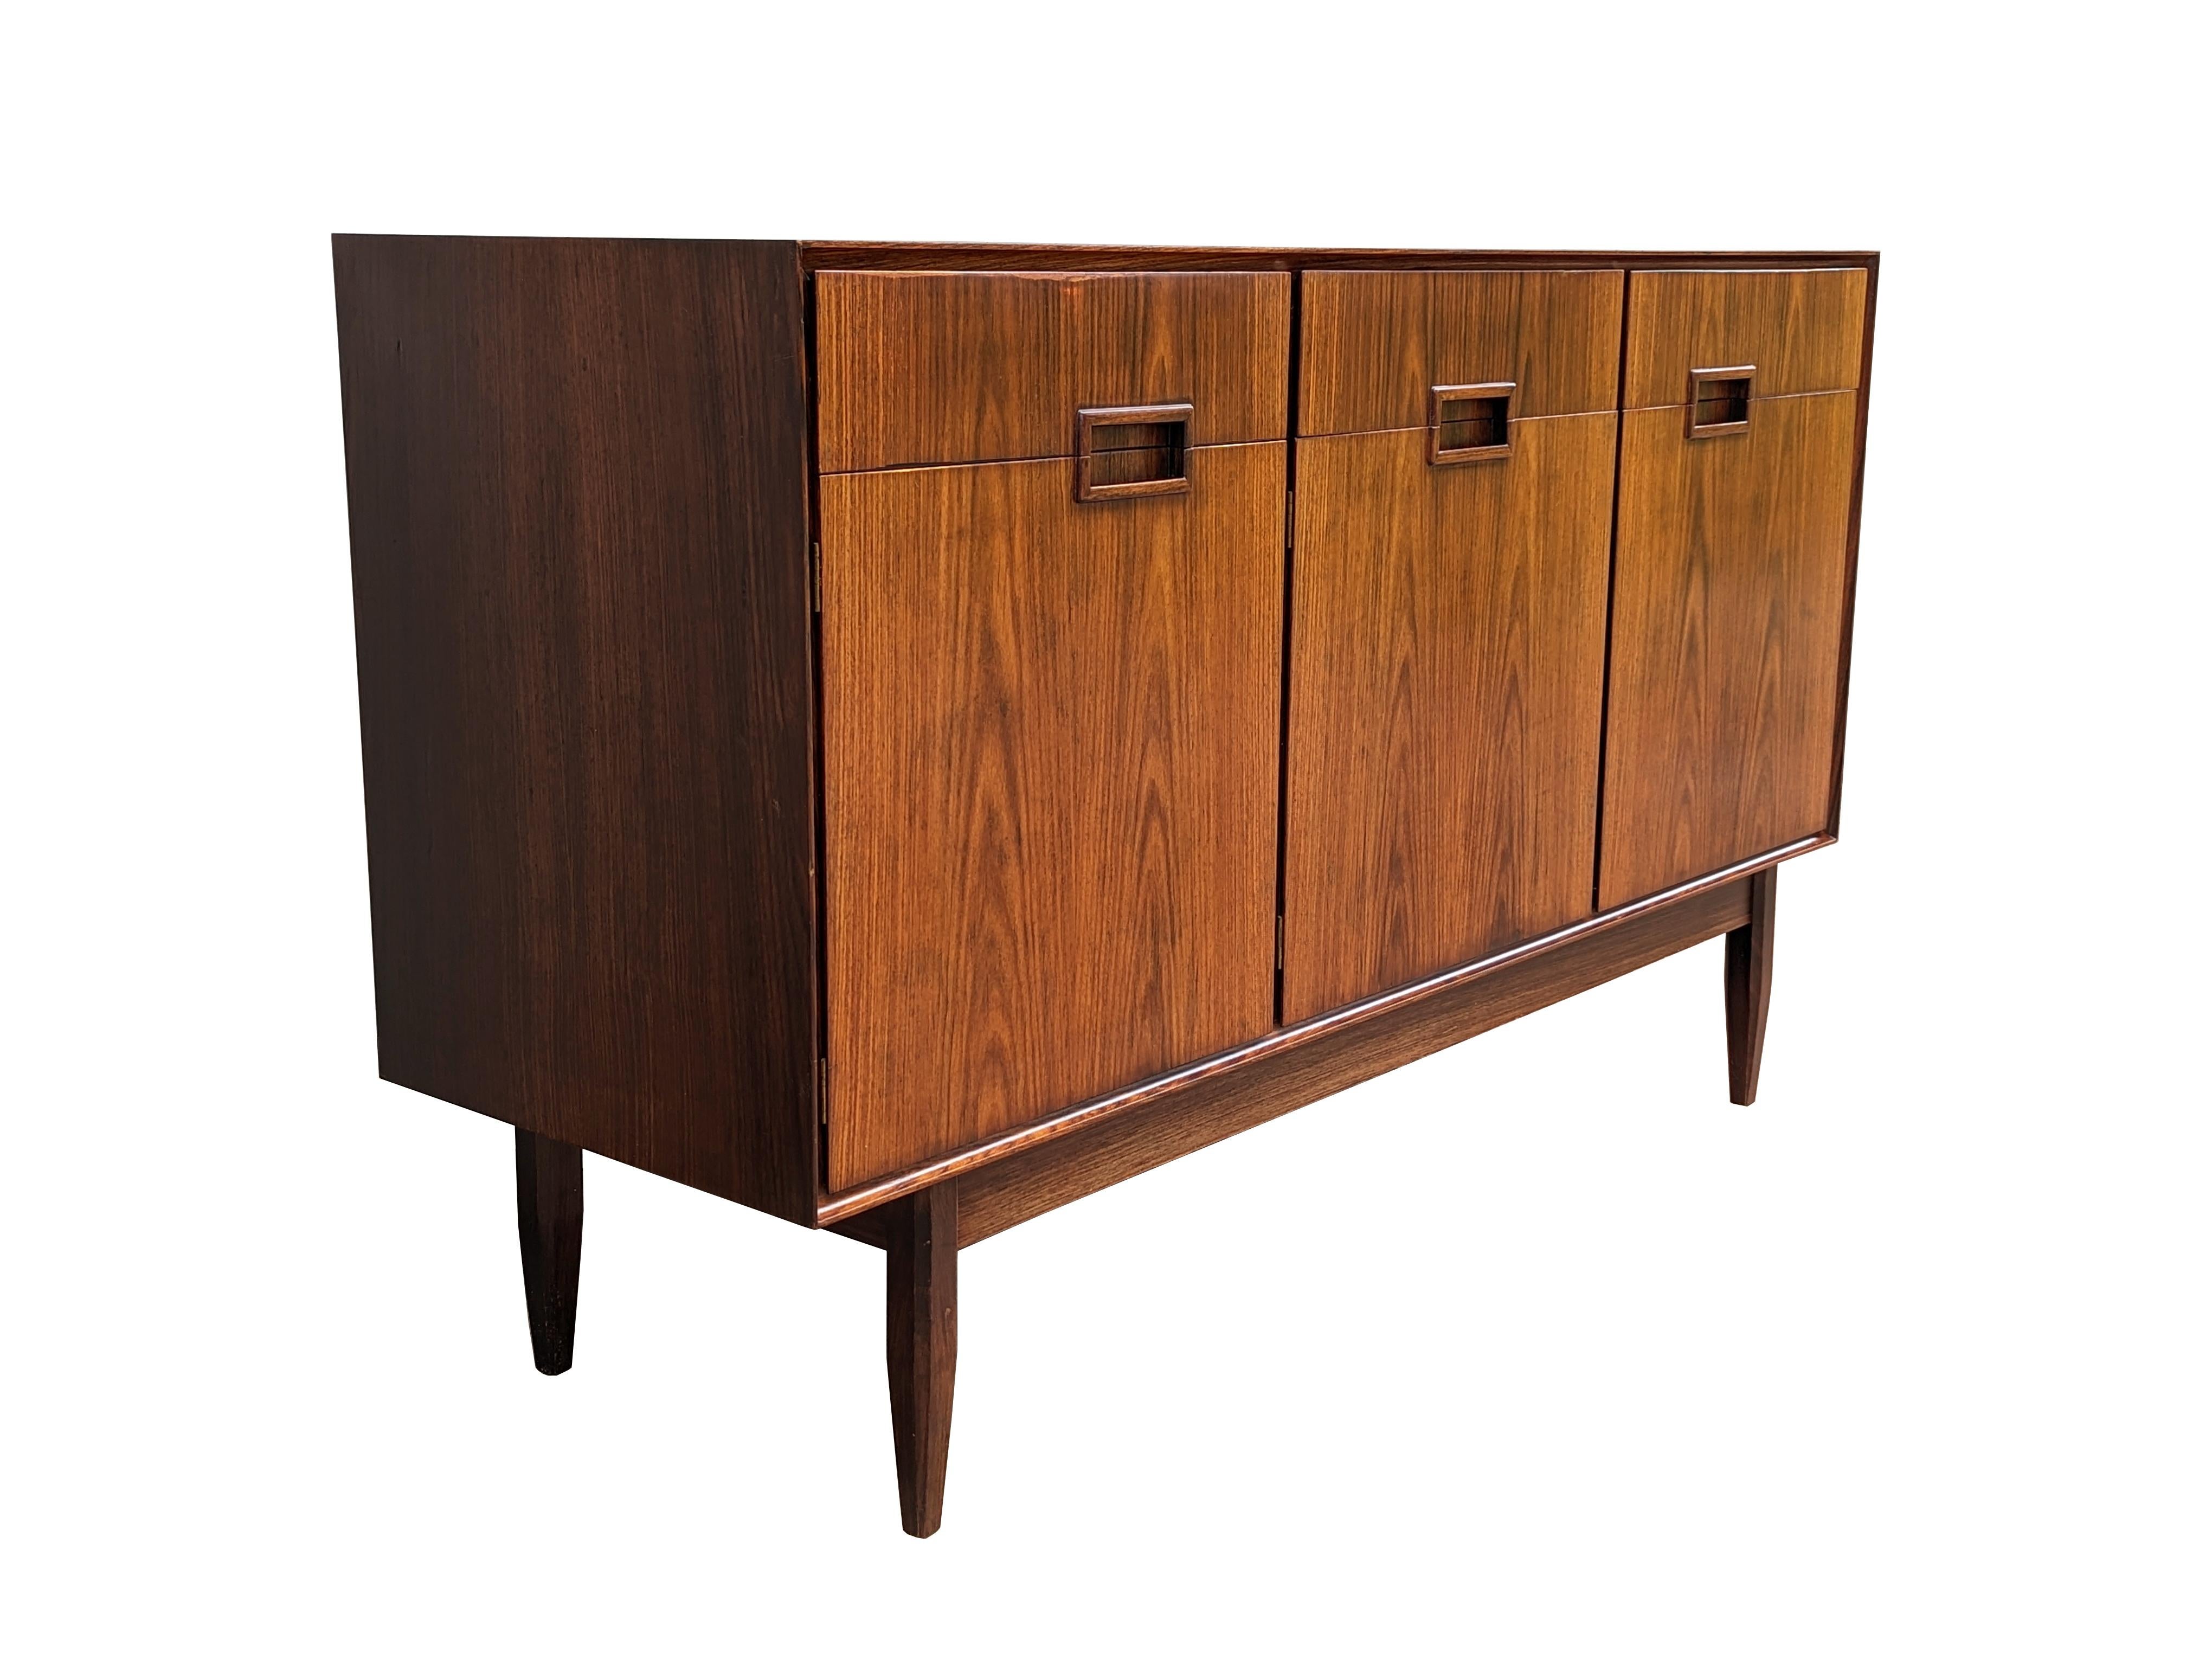 Italian Wooden Mid Century Modern Sideboards in the style of Dassi, set of 2 In Good Condition For Sale In Varese, Lombardia